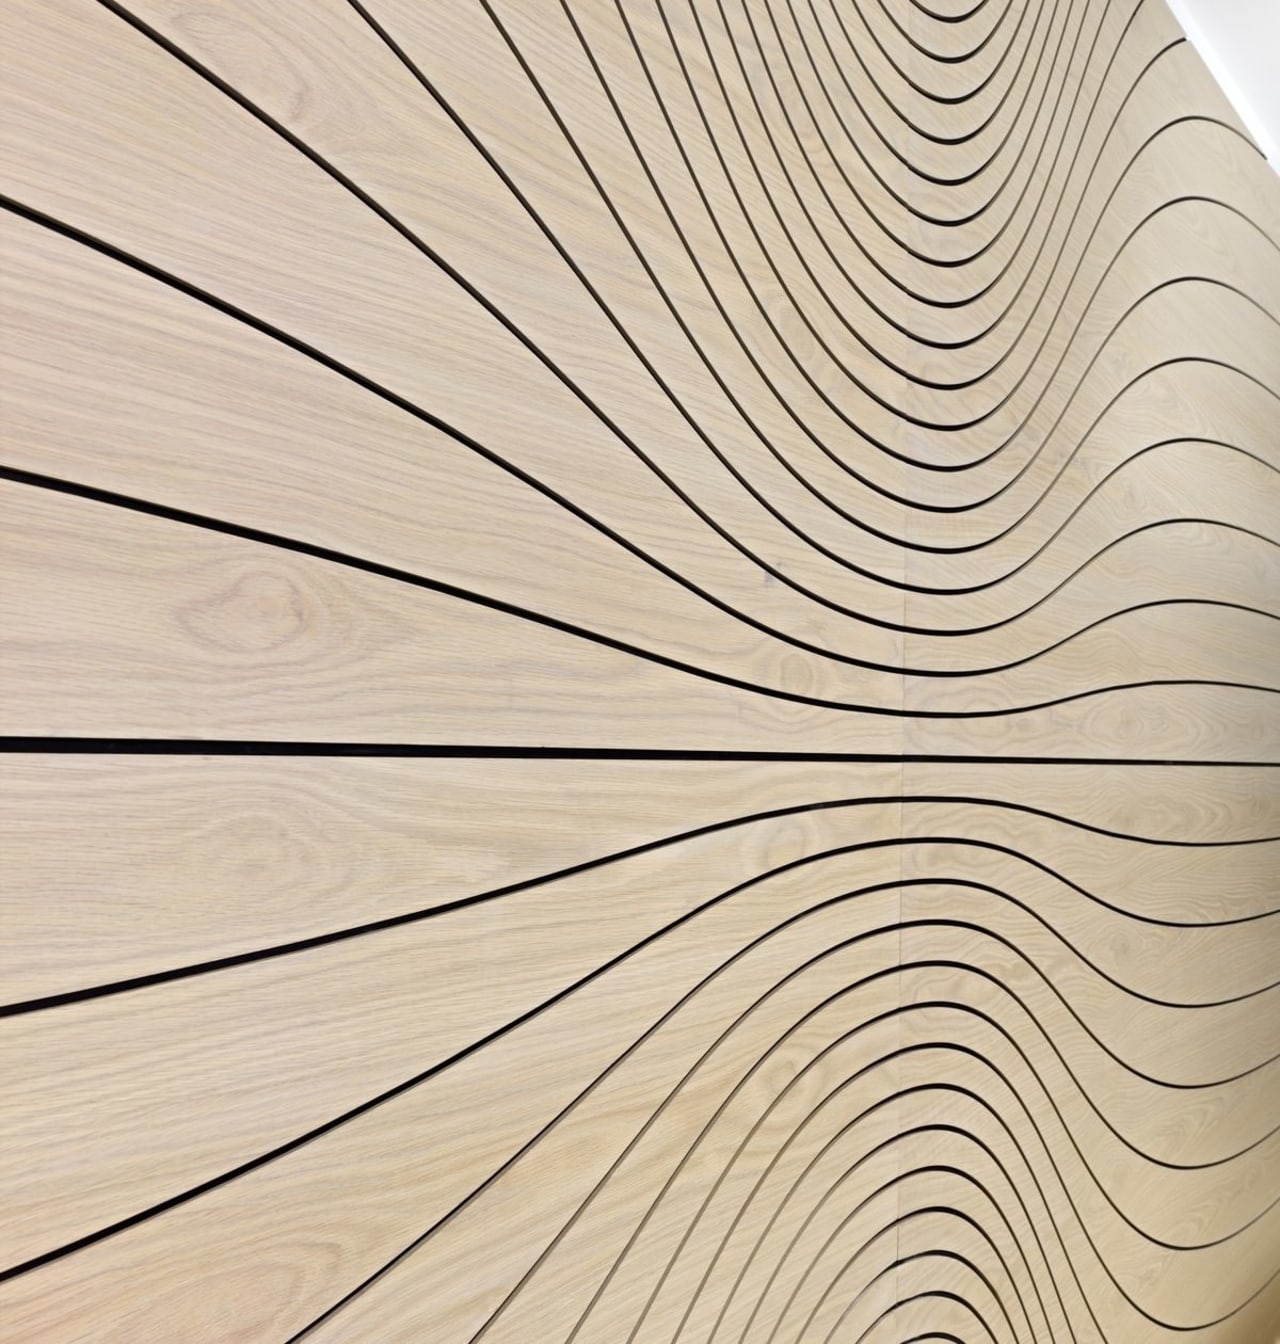 The panels on this wall twist and turn line, pattern, product design, wood, orange